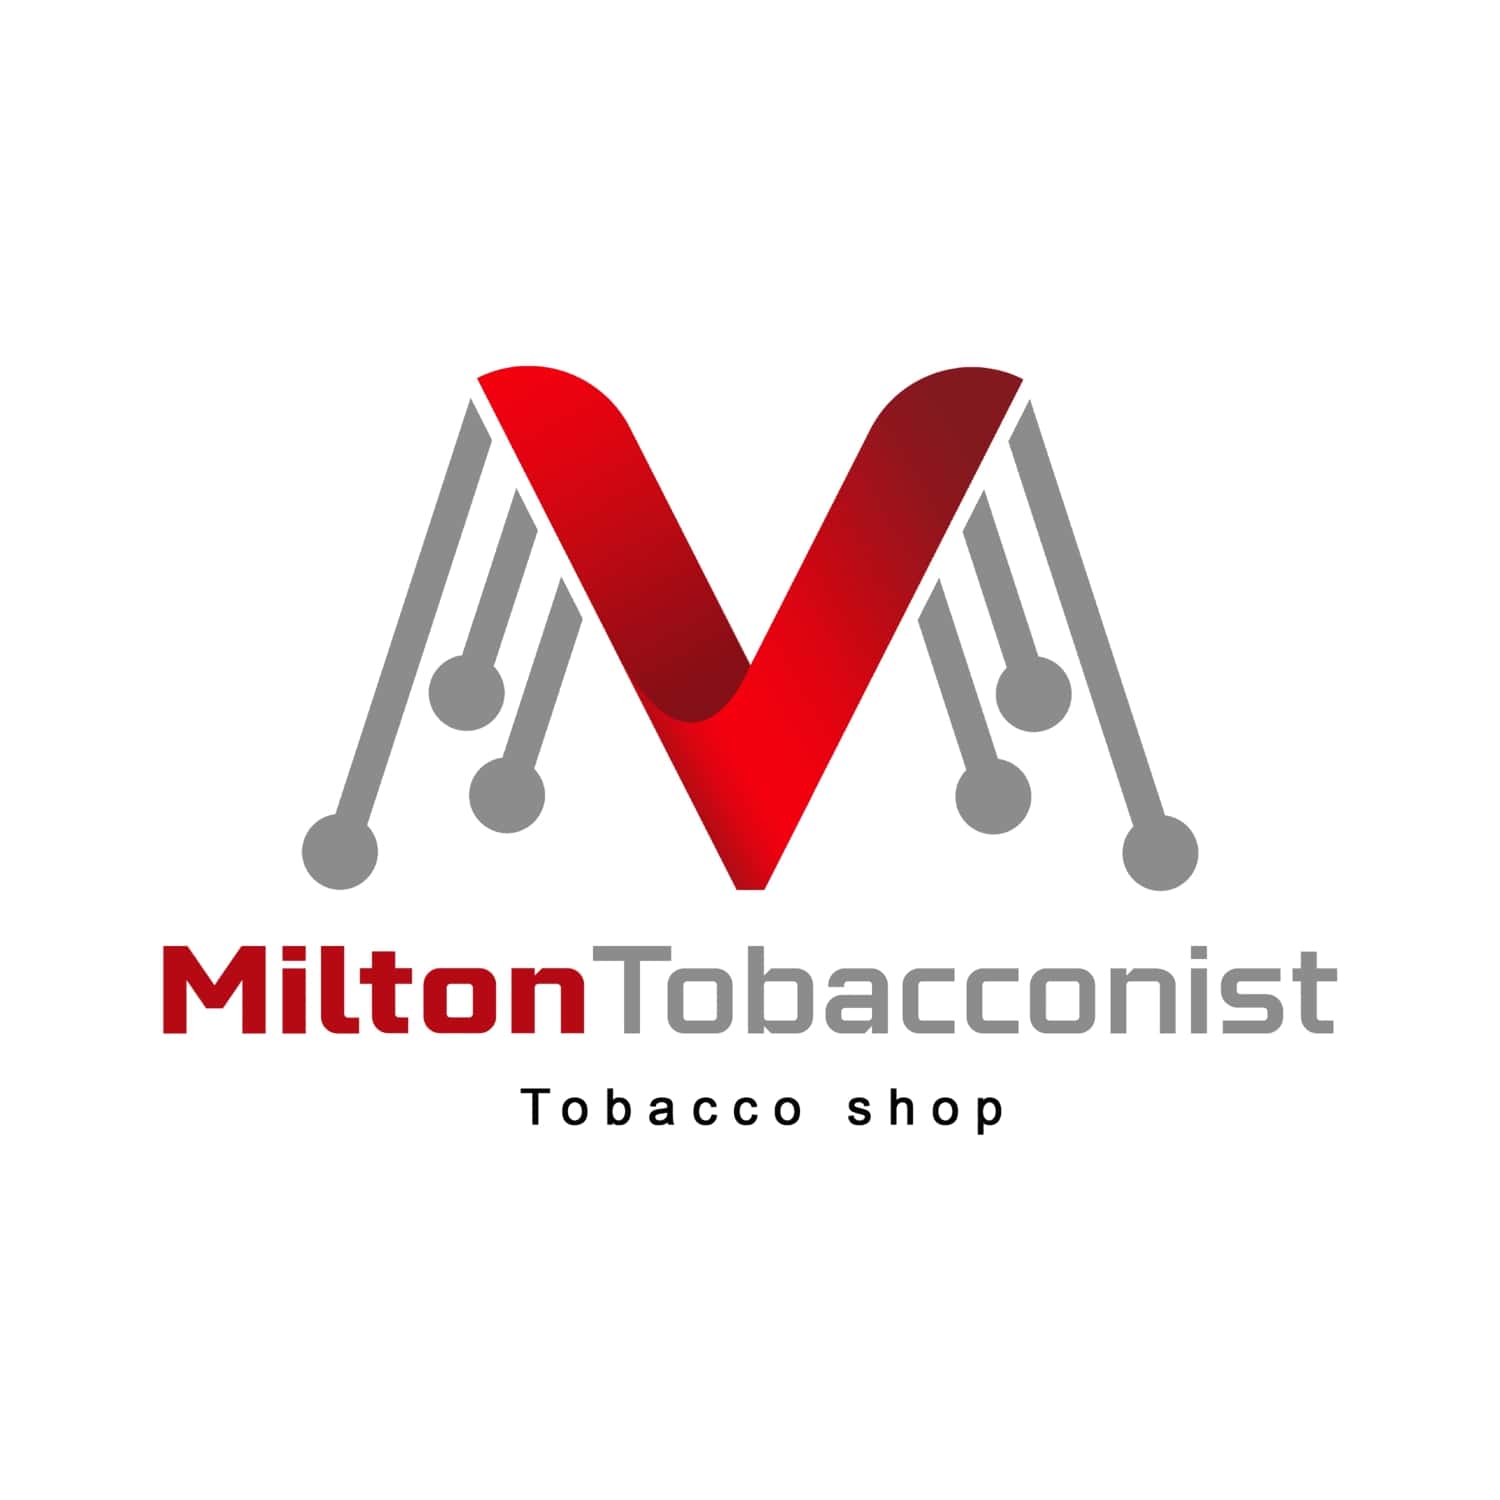 Milton Tobacconist (snacks & gifts)